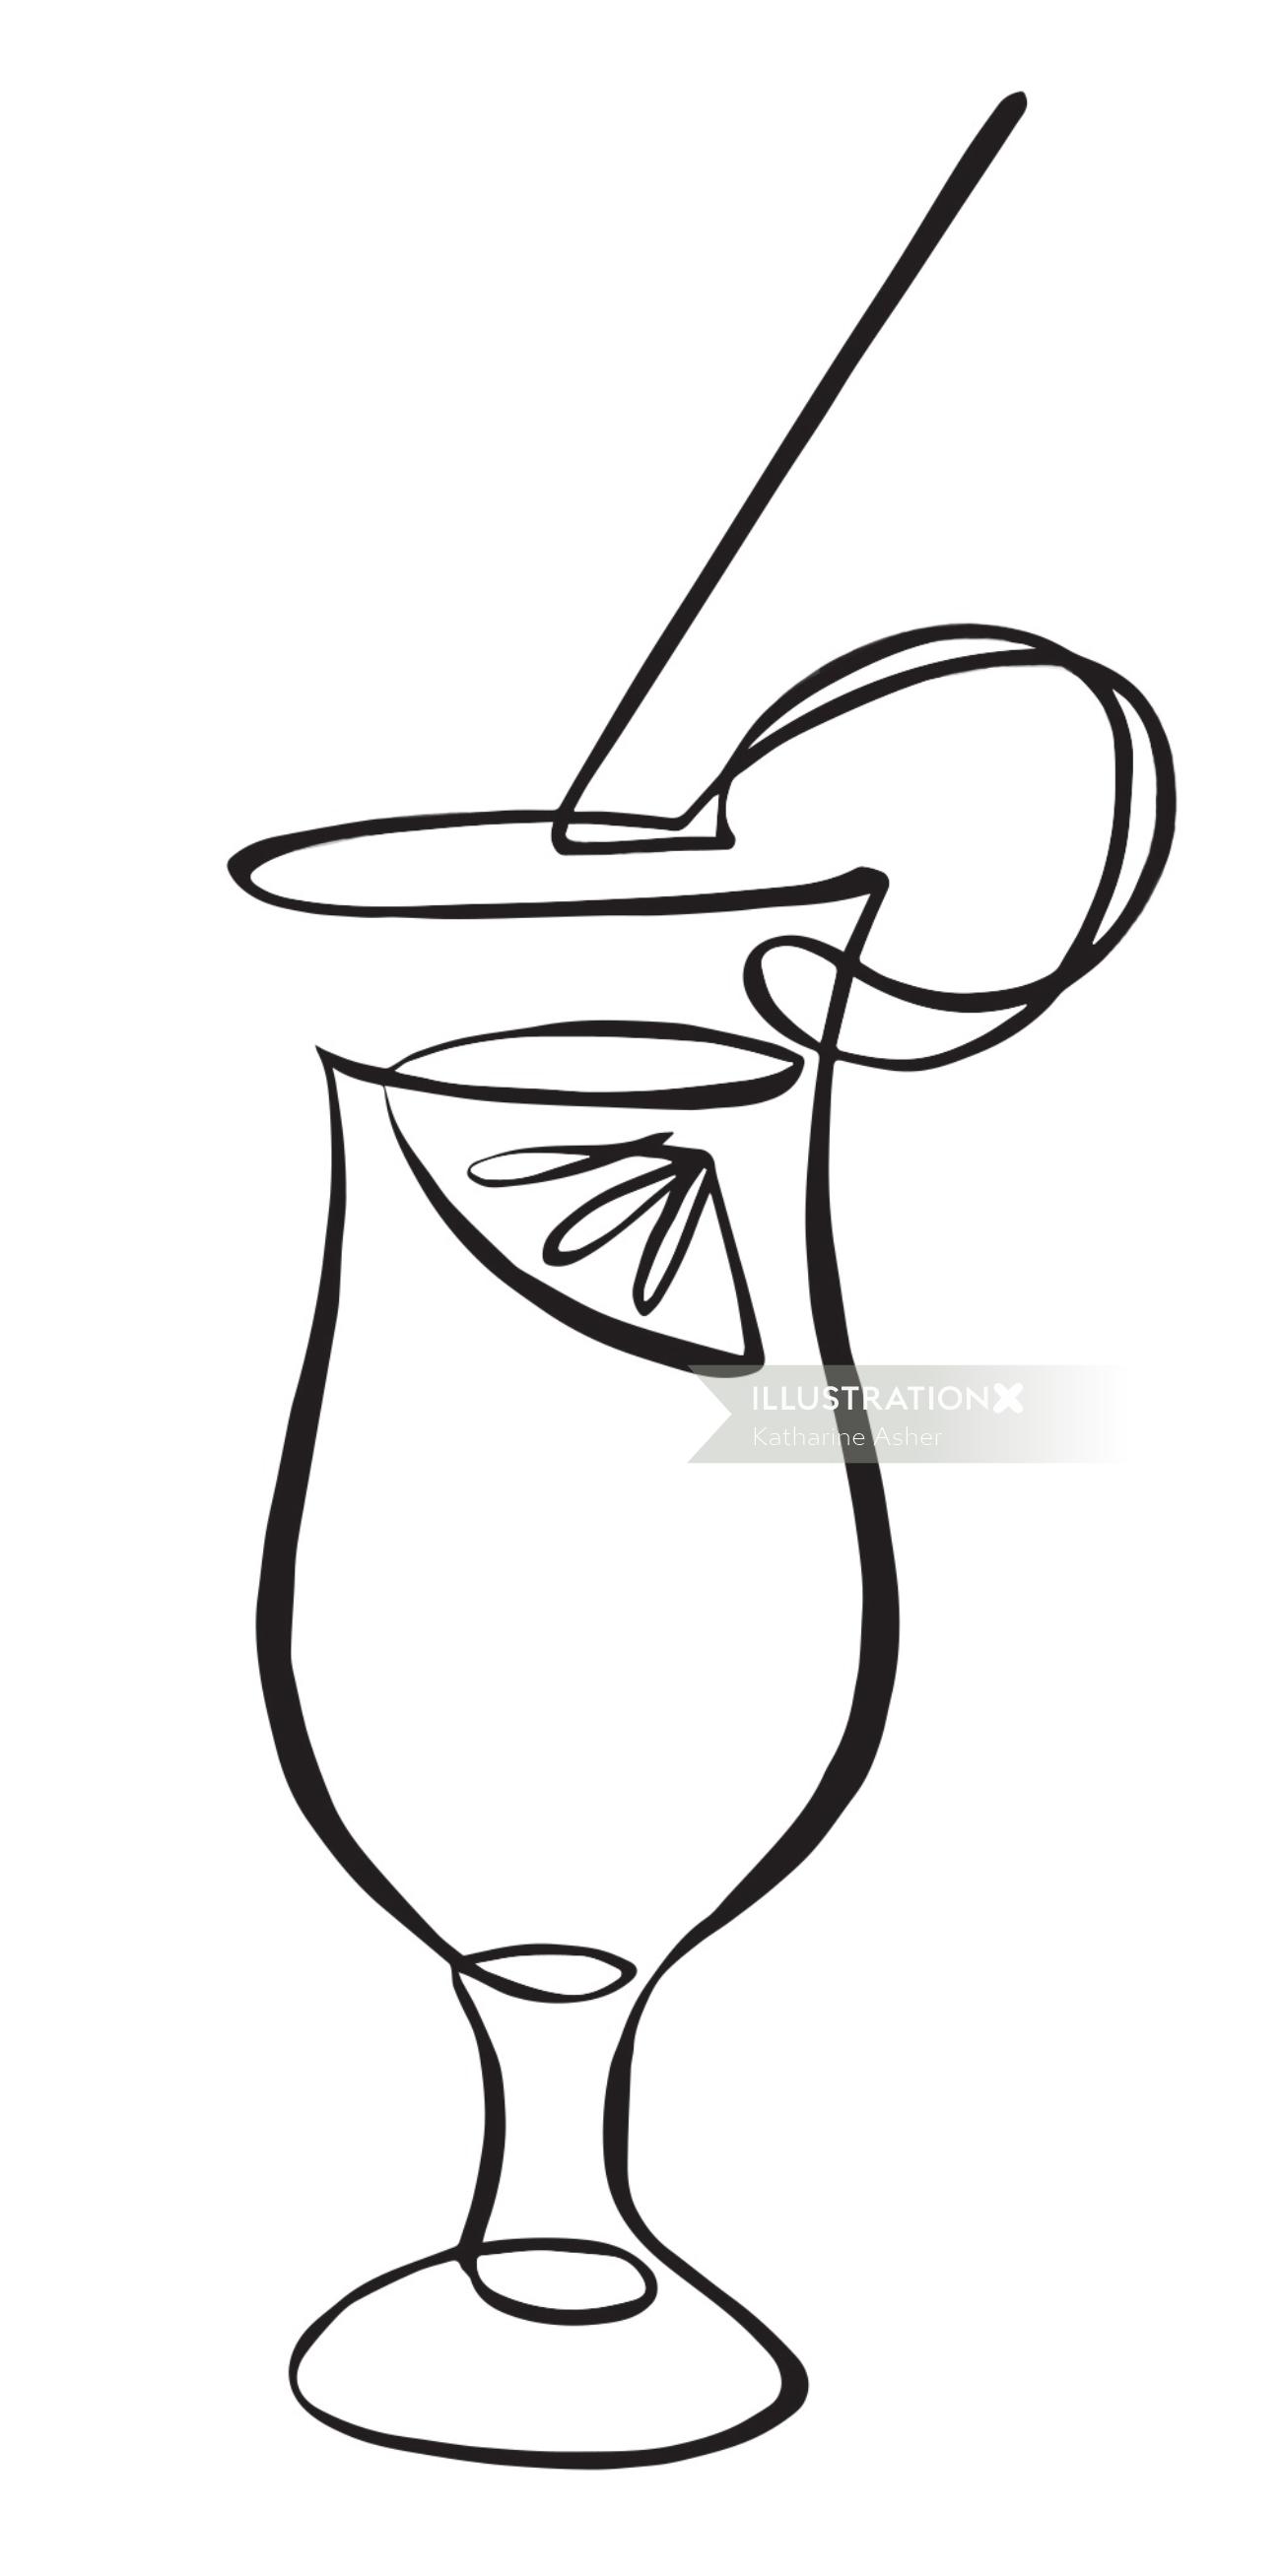 Cocktail in chutney mary black and white illustration